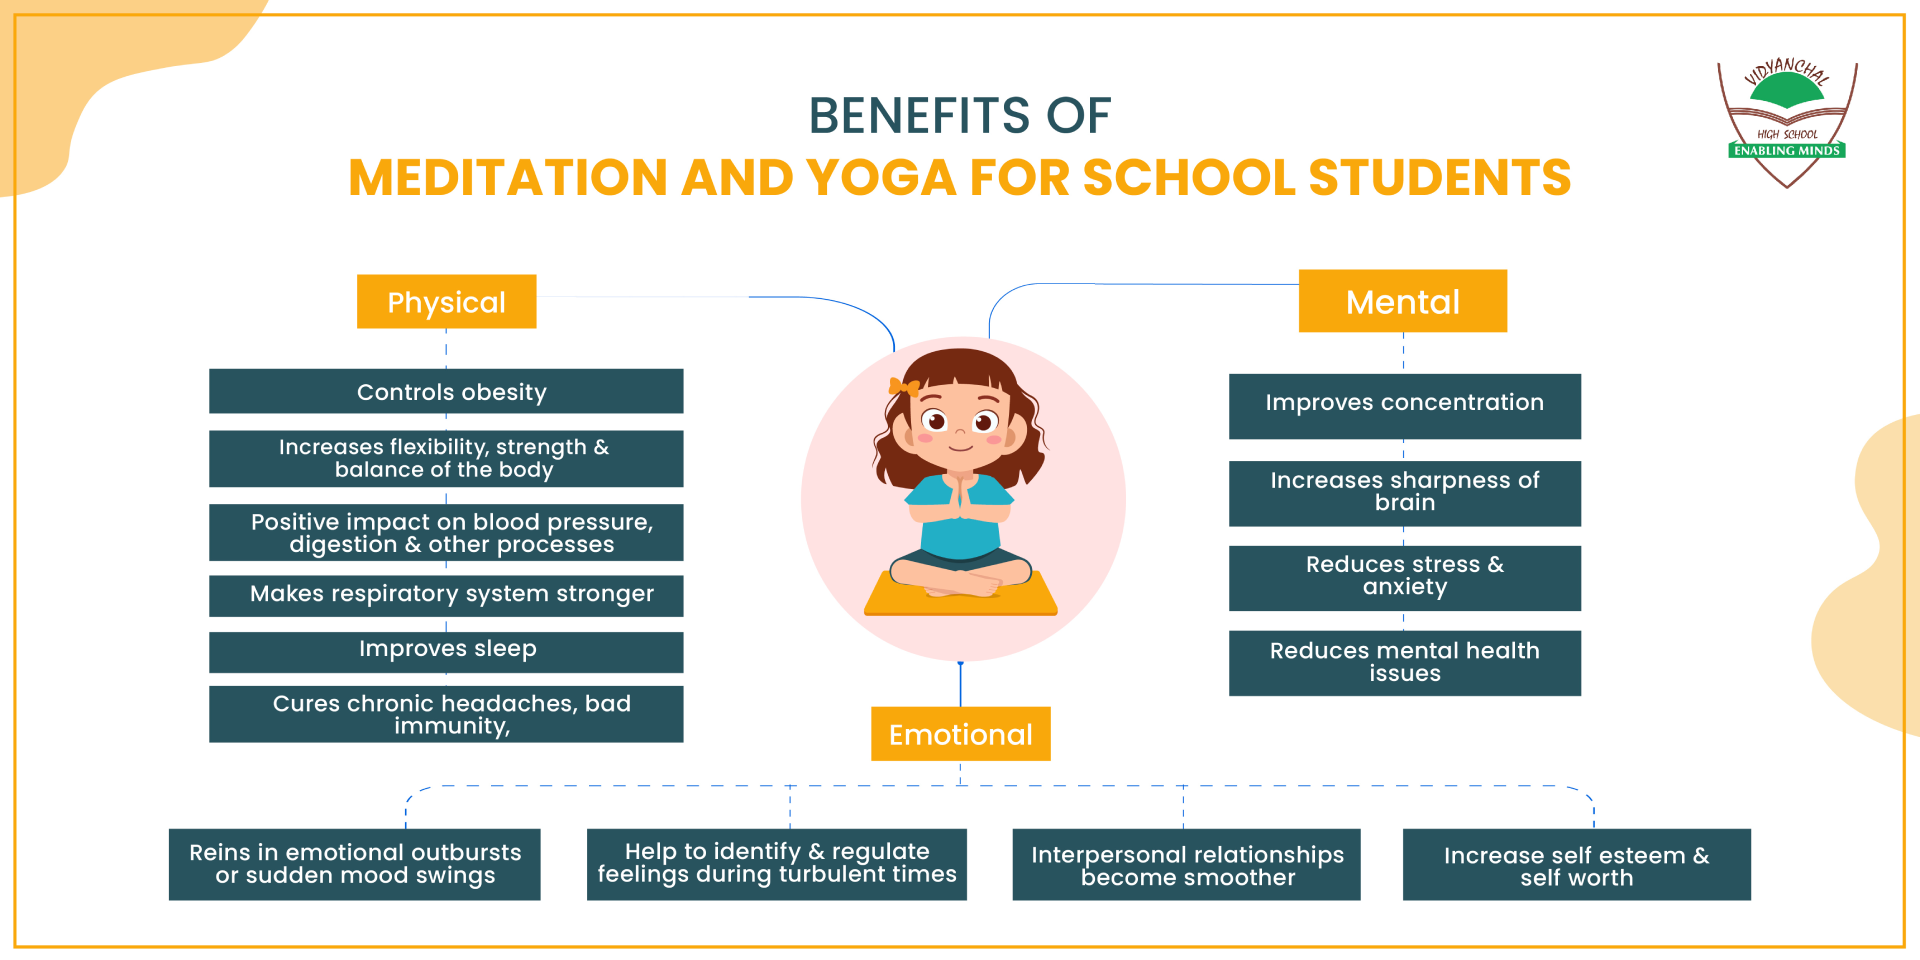 Enhancing Student Wellbeing through Meditation and Yoga